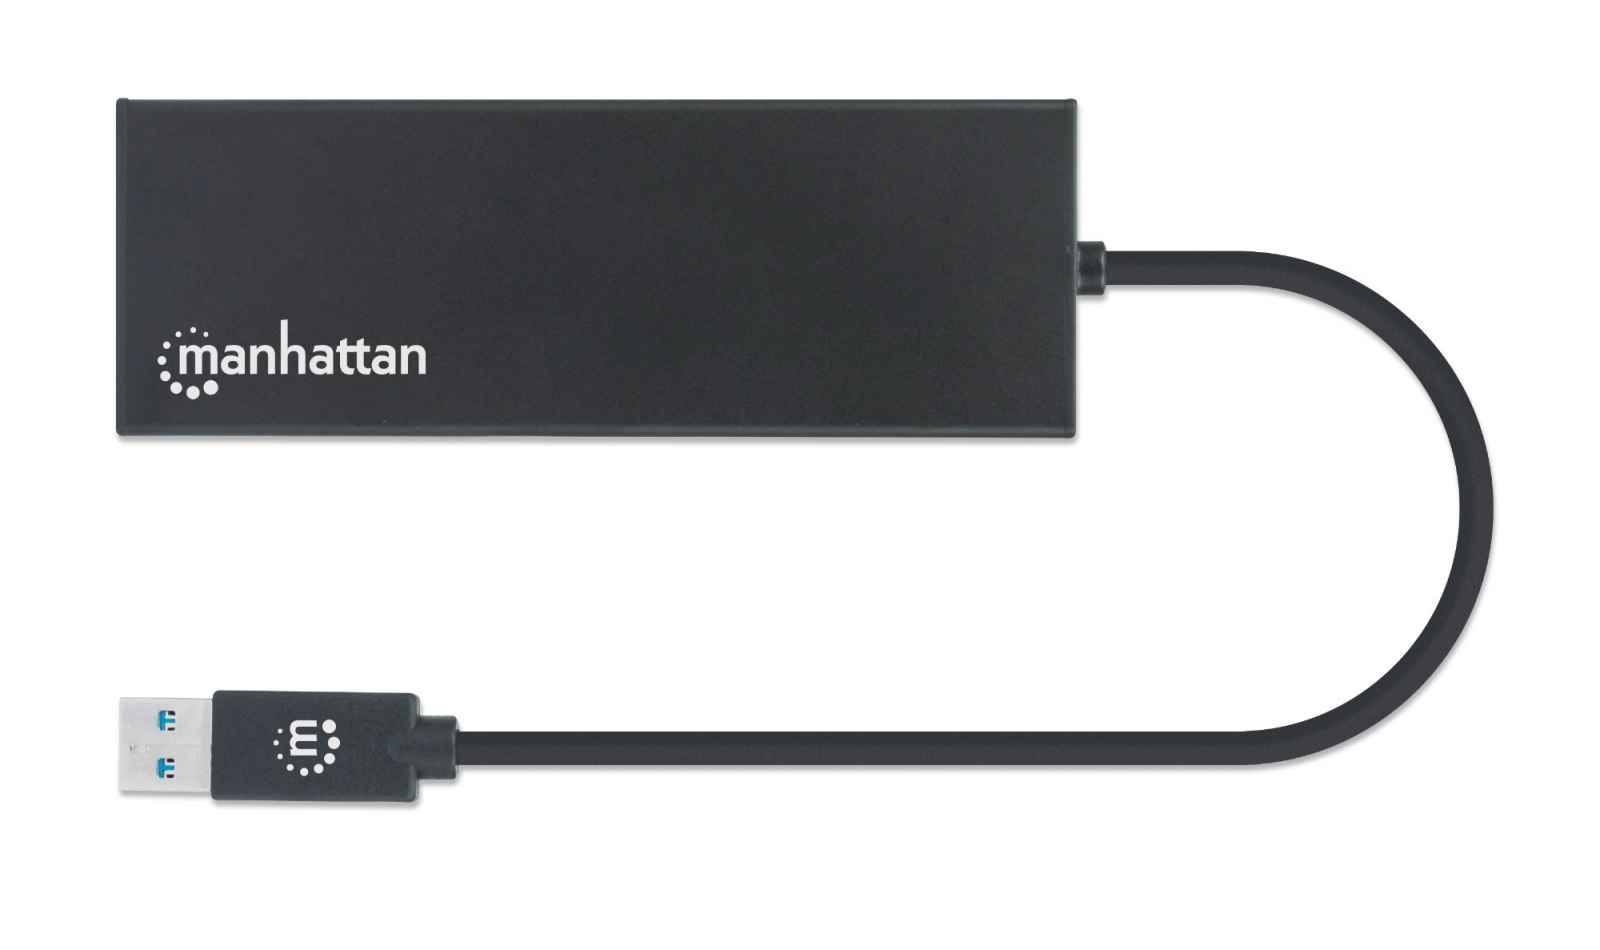 Manhattan USB-A 4-Port Hub/Dock/Converter, USB-A to HDMI, VGA, 2x USB-A and Ethernet, HDMI: 4k@60Hz, USB-A: 5 Gbps, VGA: 2048x1152@60Hz, Gigabit, Micro-USB Power Input Port (Optional, only when additional power needed. Not required for dual monitor functi